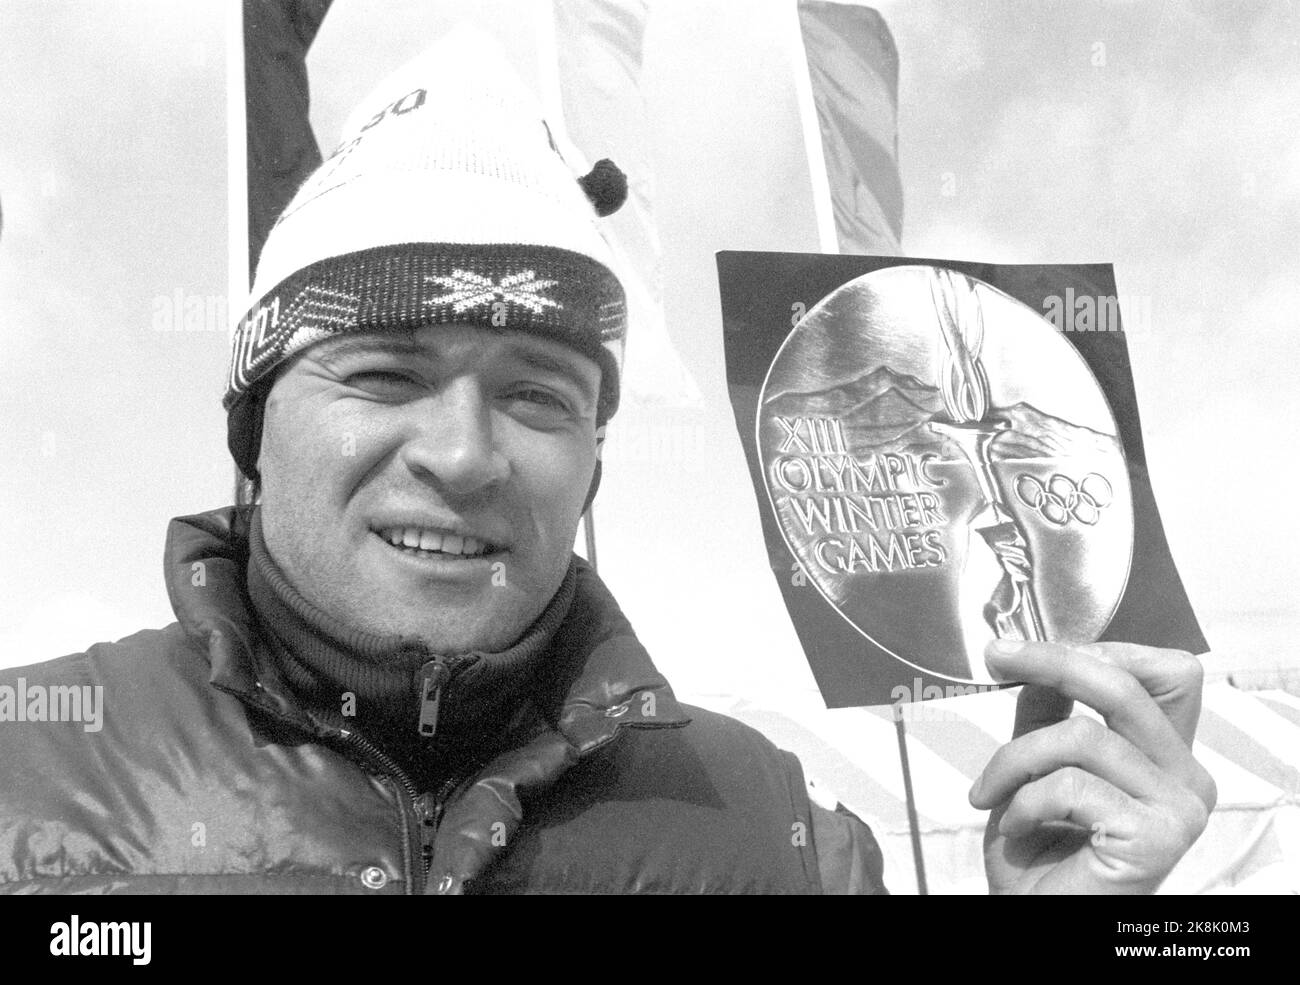 Lake Placid, N.Y., USA, 198002: Olympic Lake Placid 1980. Skating, women. Image: Ove Aunli (NOR) with the 'Bronze Medal' at 15km cross-country skiing during the Lake Placid Winter Olympics, February 17, 1980. He took bronze at 15km, beaten by Thomas Wassberg (gold/Sve) and Juha Mieto (silver/fine) .. Photo: Erik Thorberg / NTB / NTB Stock Photo